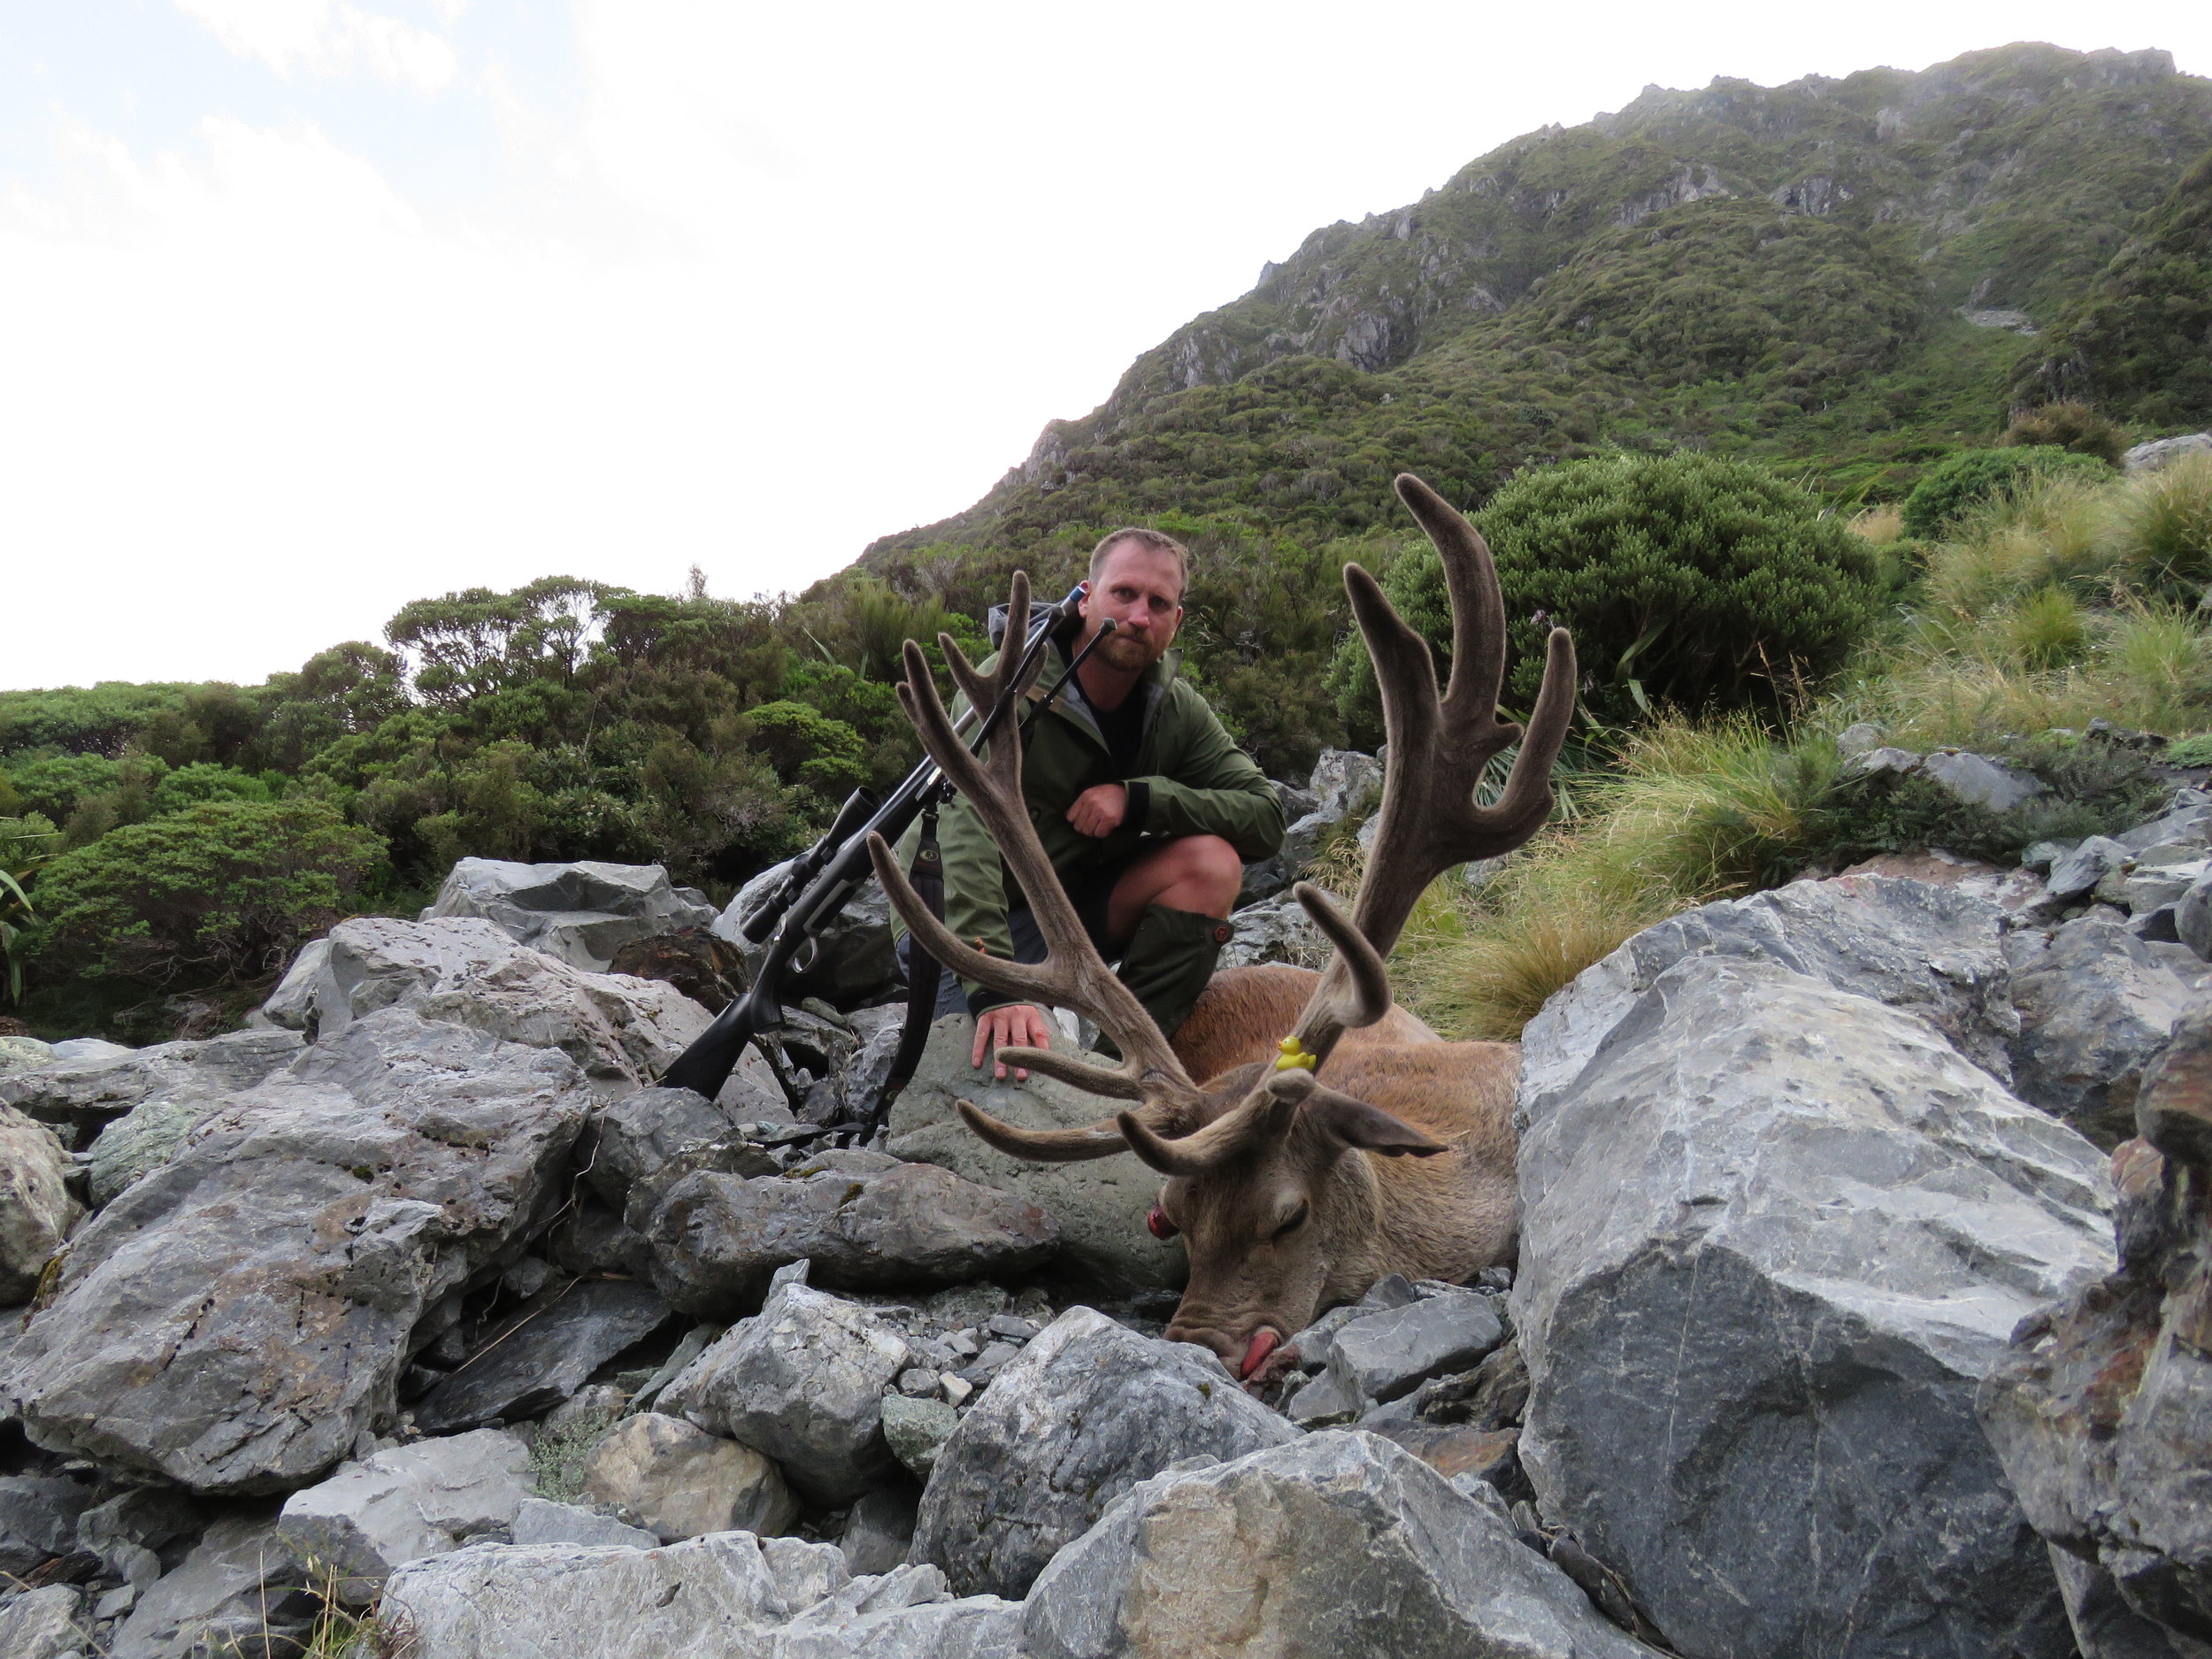  Shaun with the 15 point public land stag 